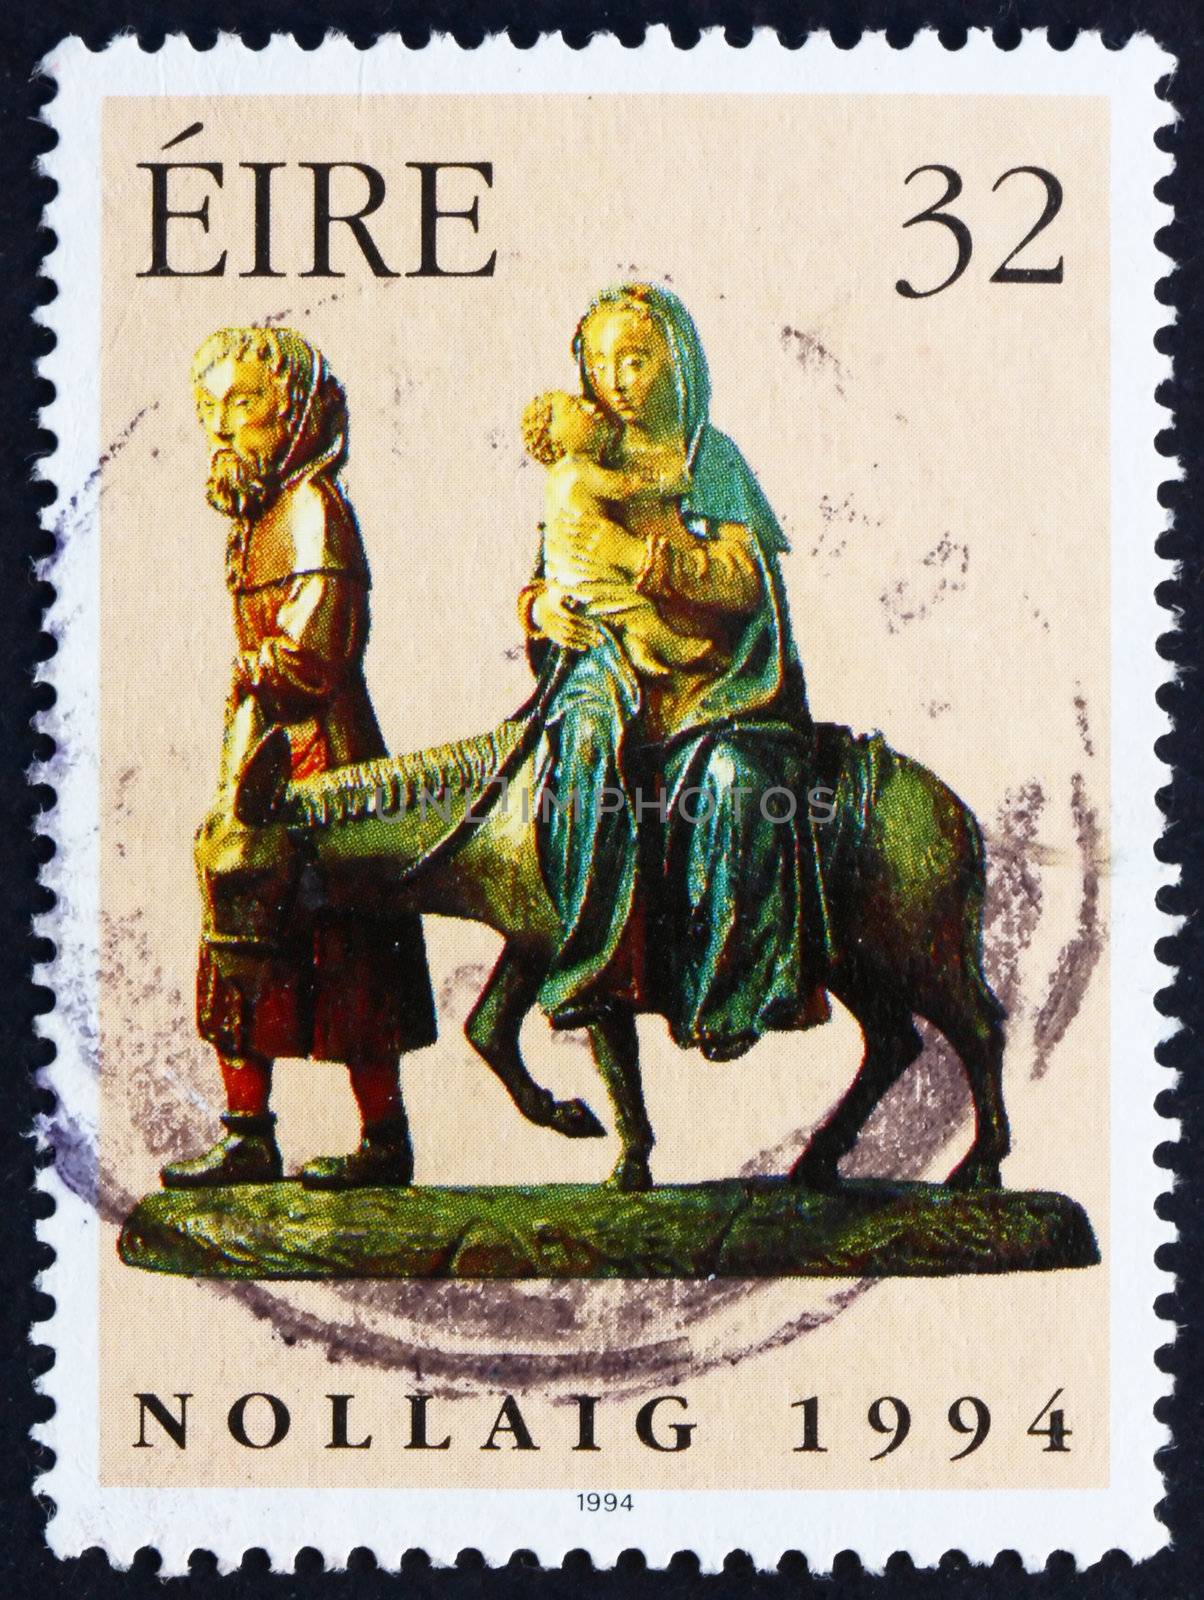 IRELAND - CIRCA 1994: a stamp printed in the Ireland shows Flight into Egypt, 15th Century Wood Carving, Christmas, circa 1994